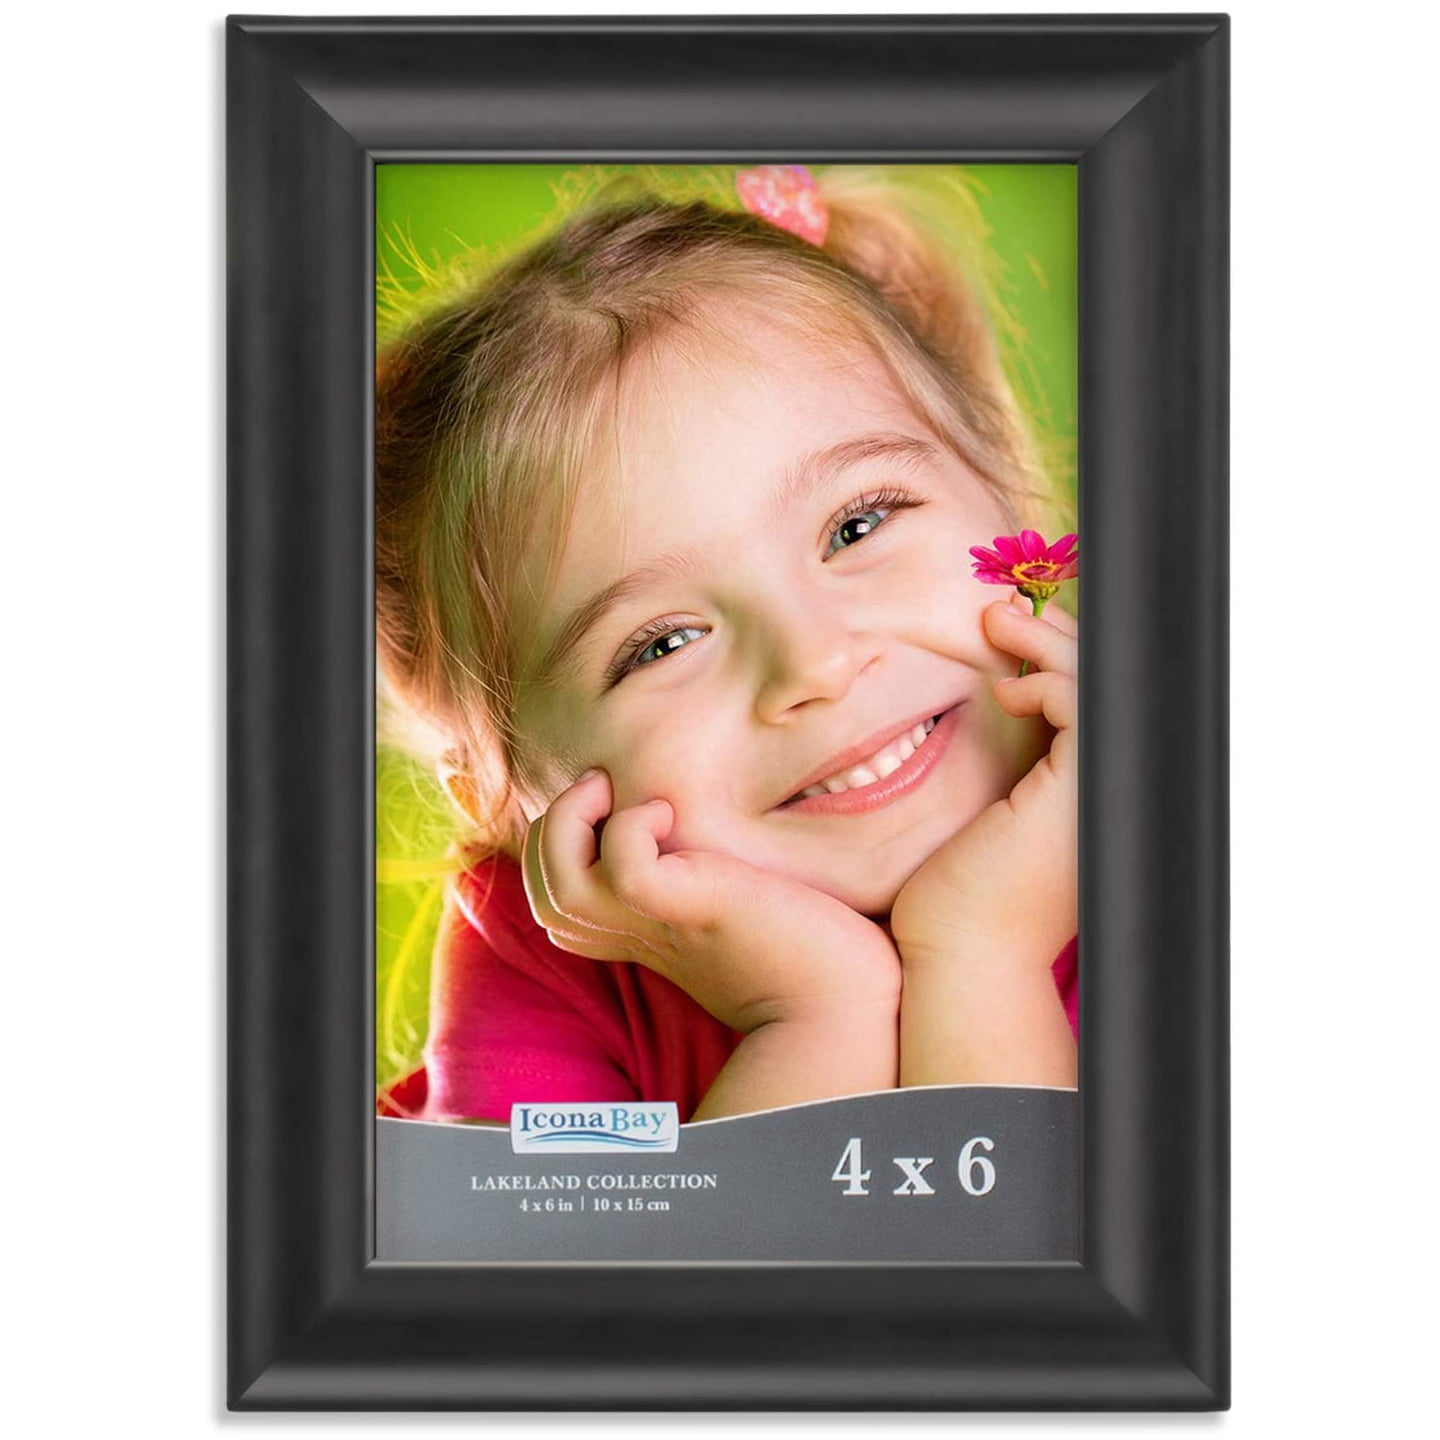 10x15 picture frame